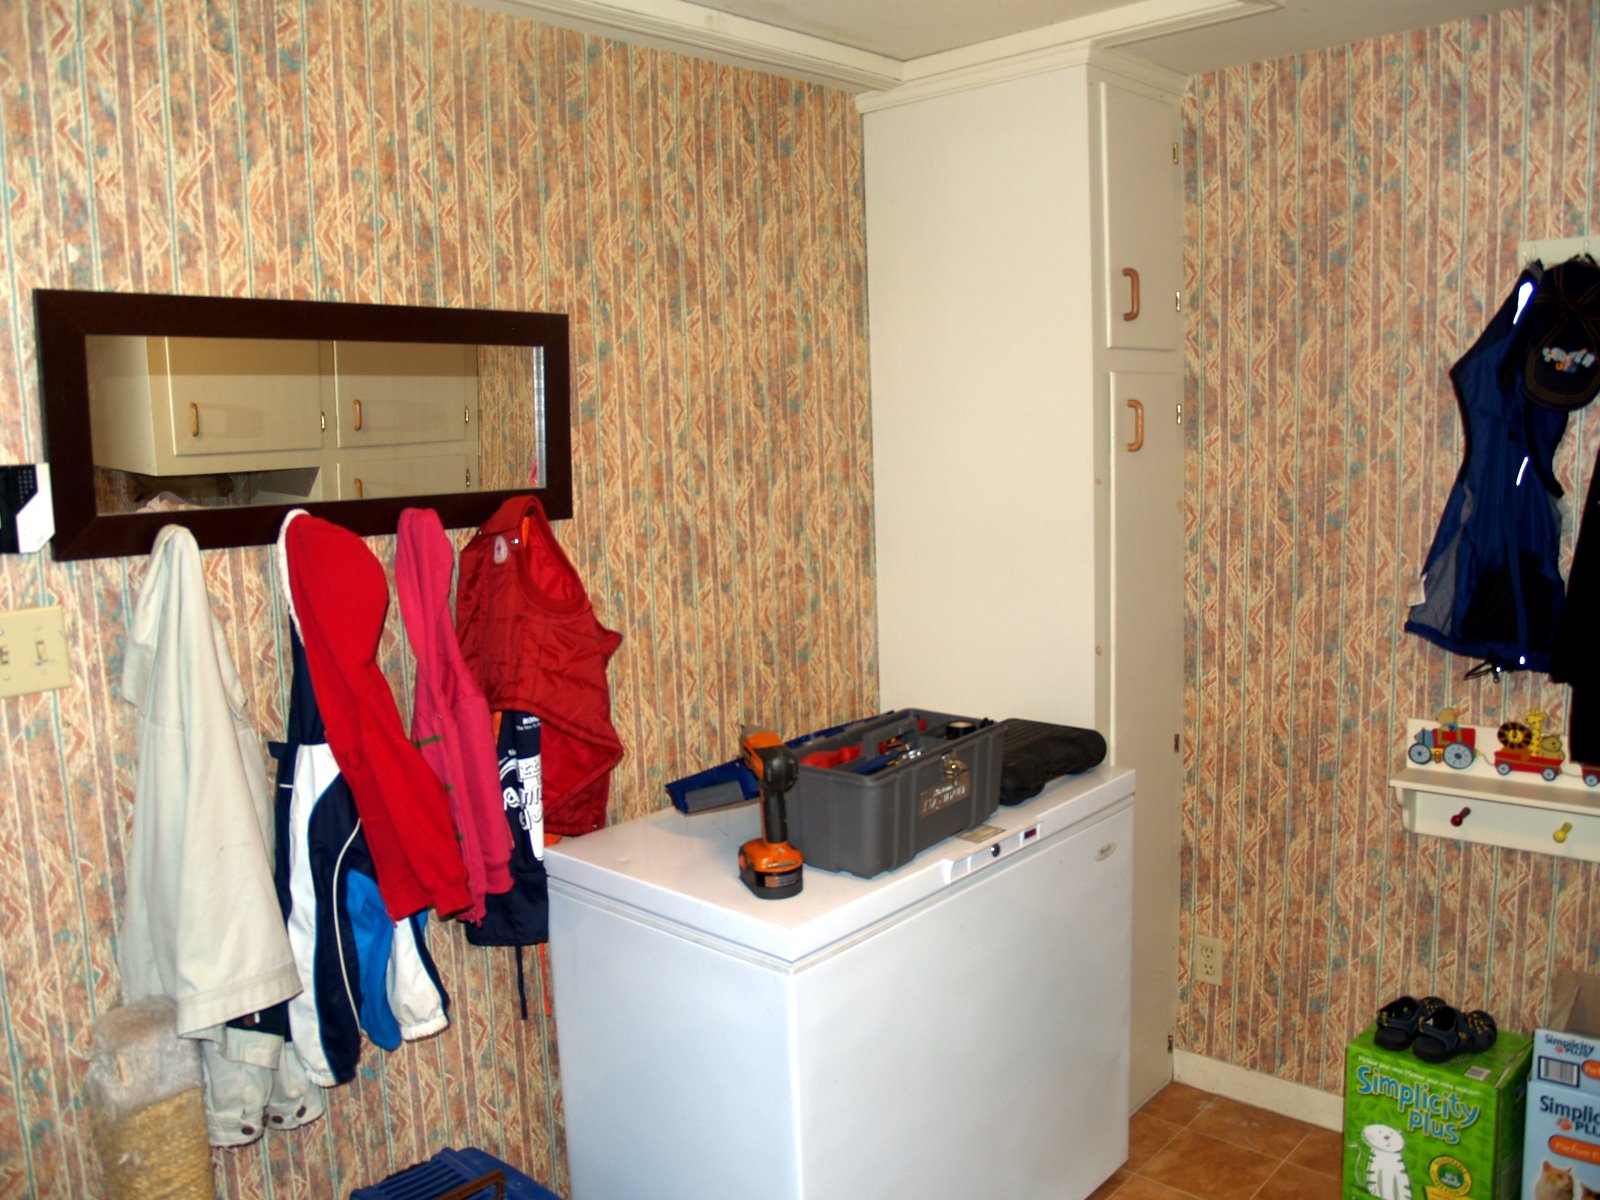 First, a few before shots of the laundry room. Nice wallpaper!